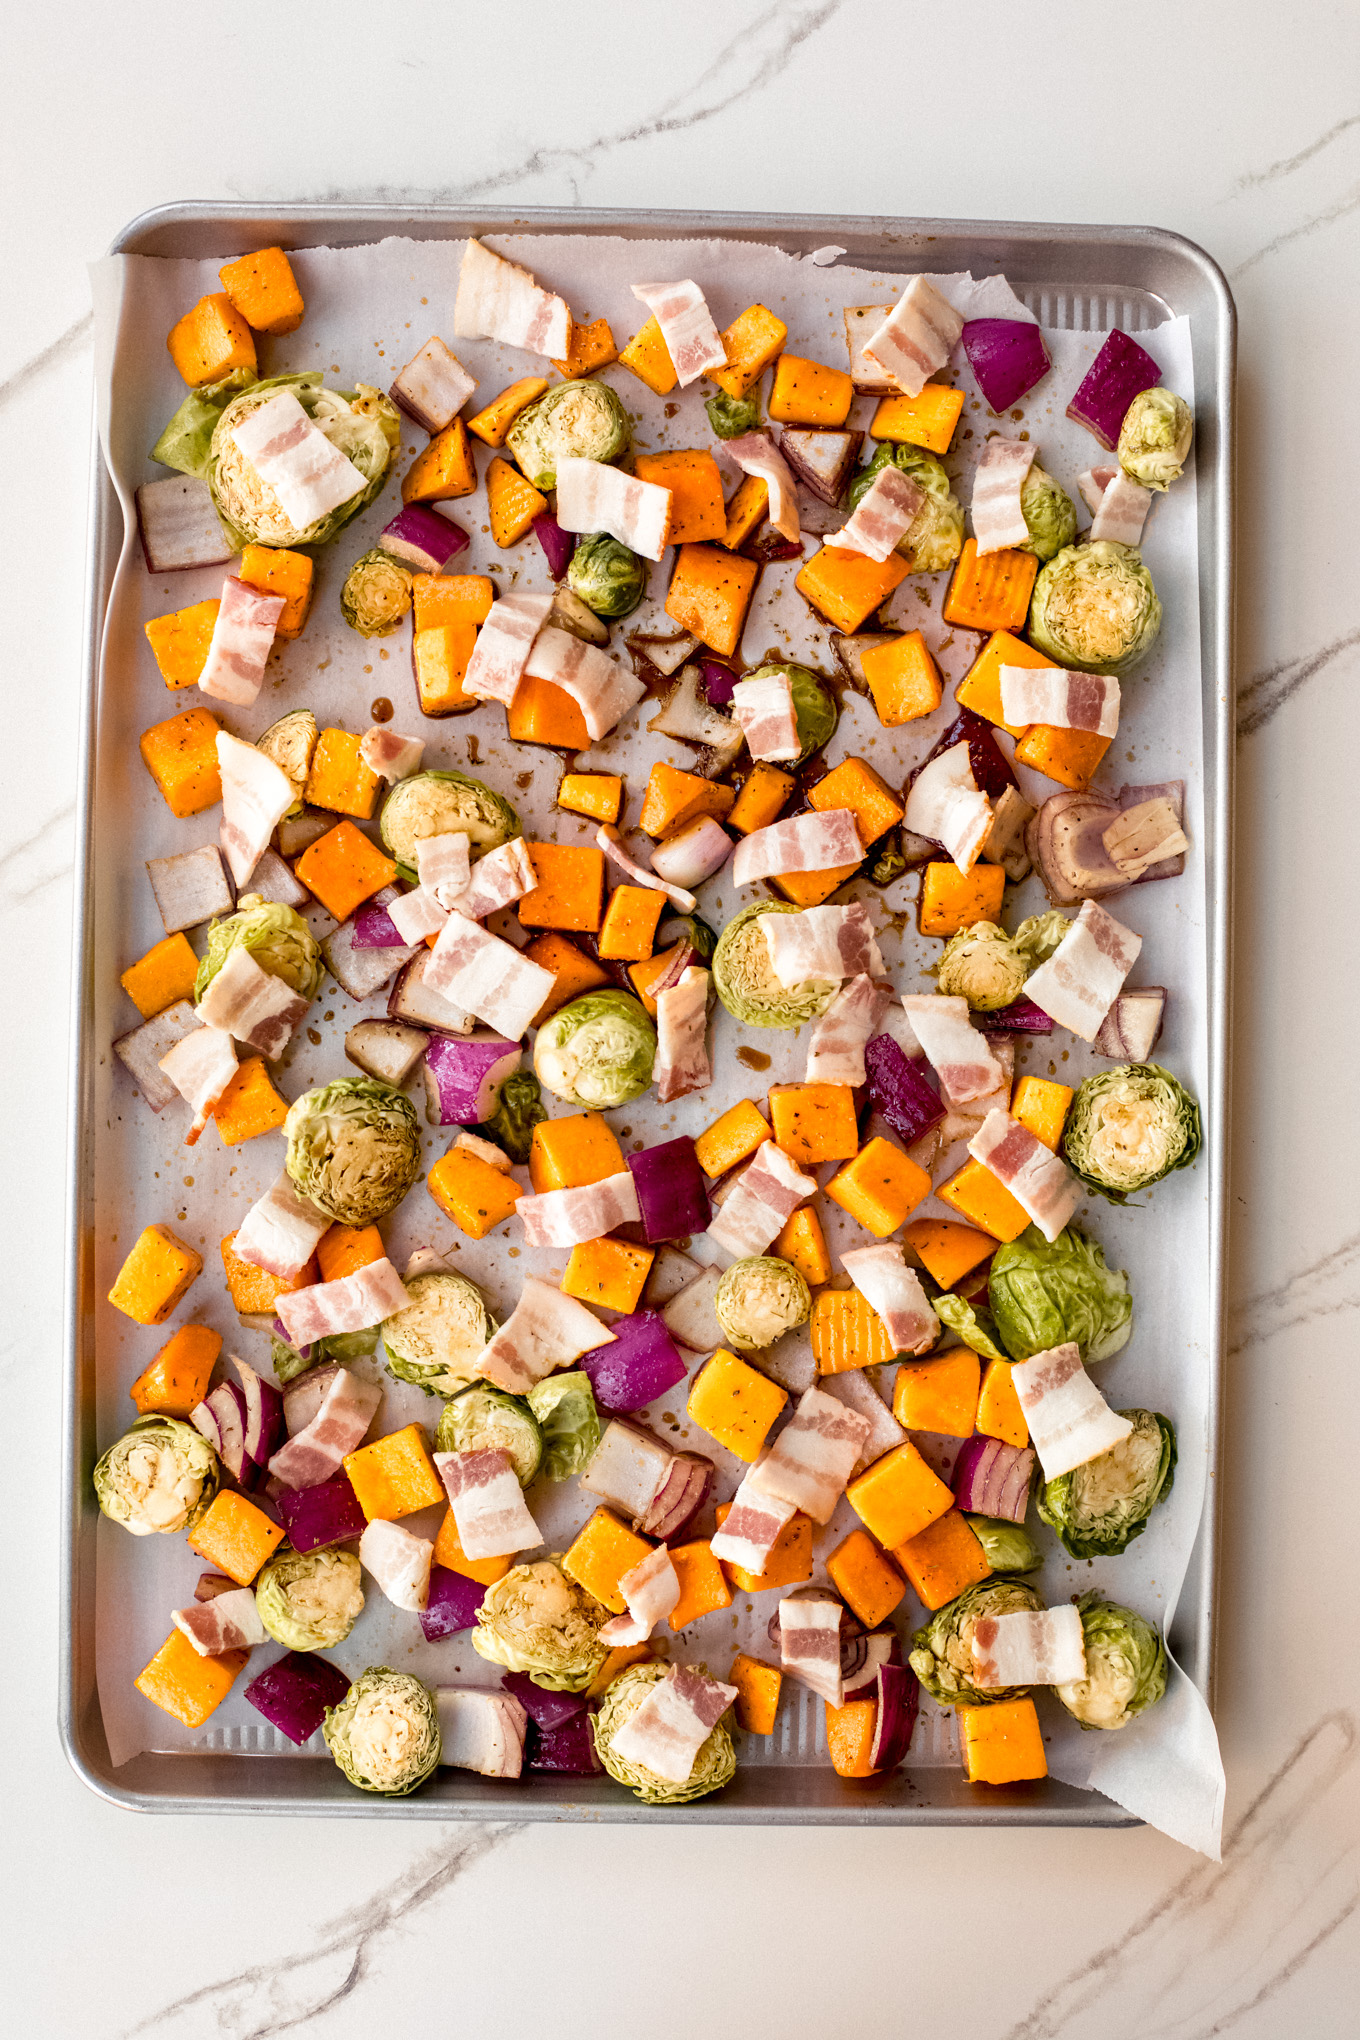 raw cut up vegetables on a sheet pan with bacon.